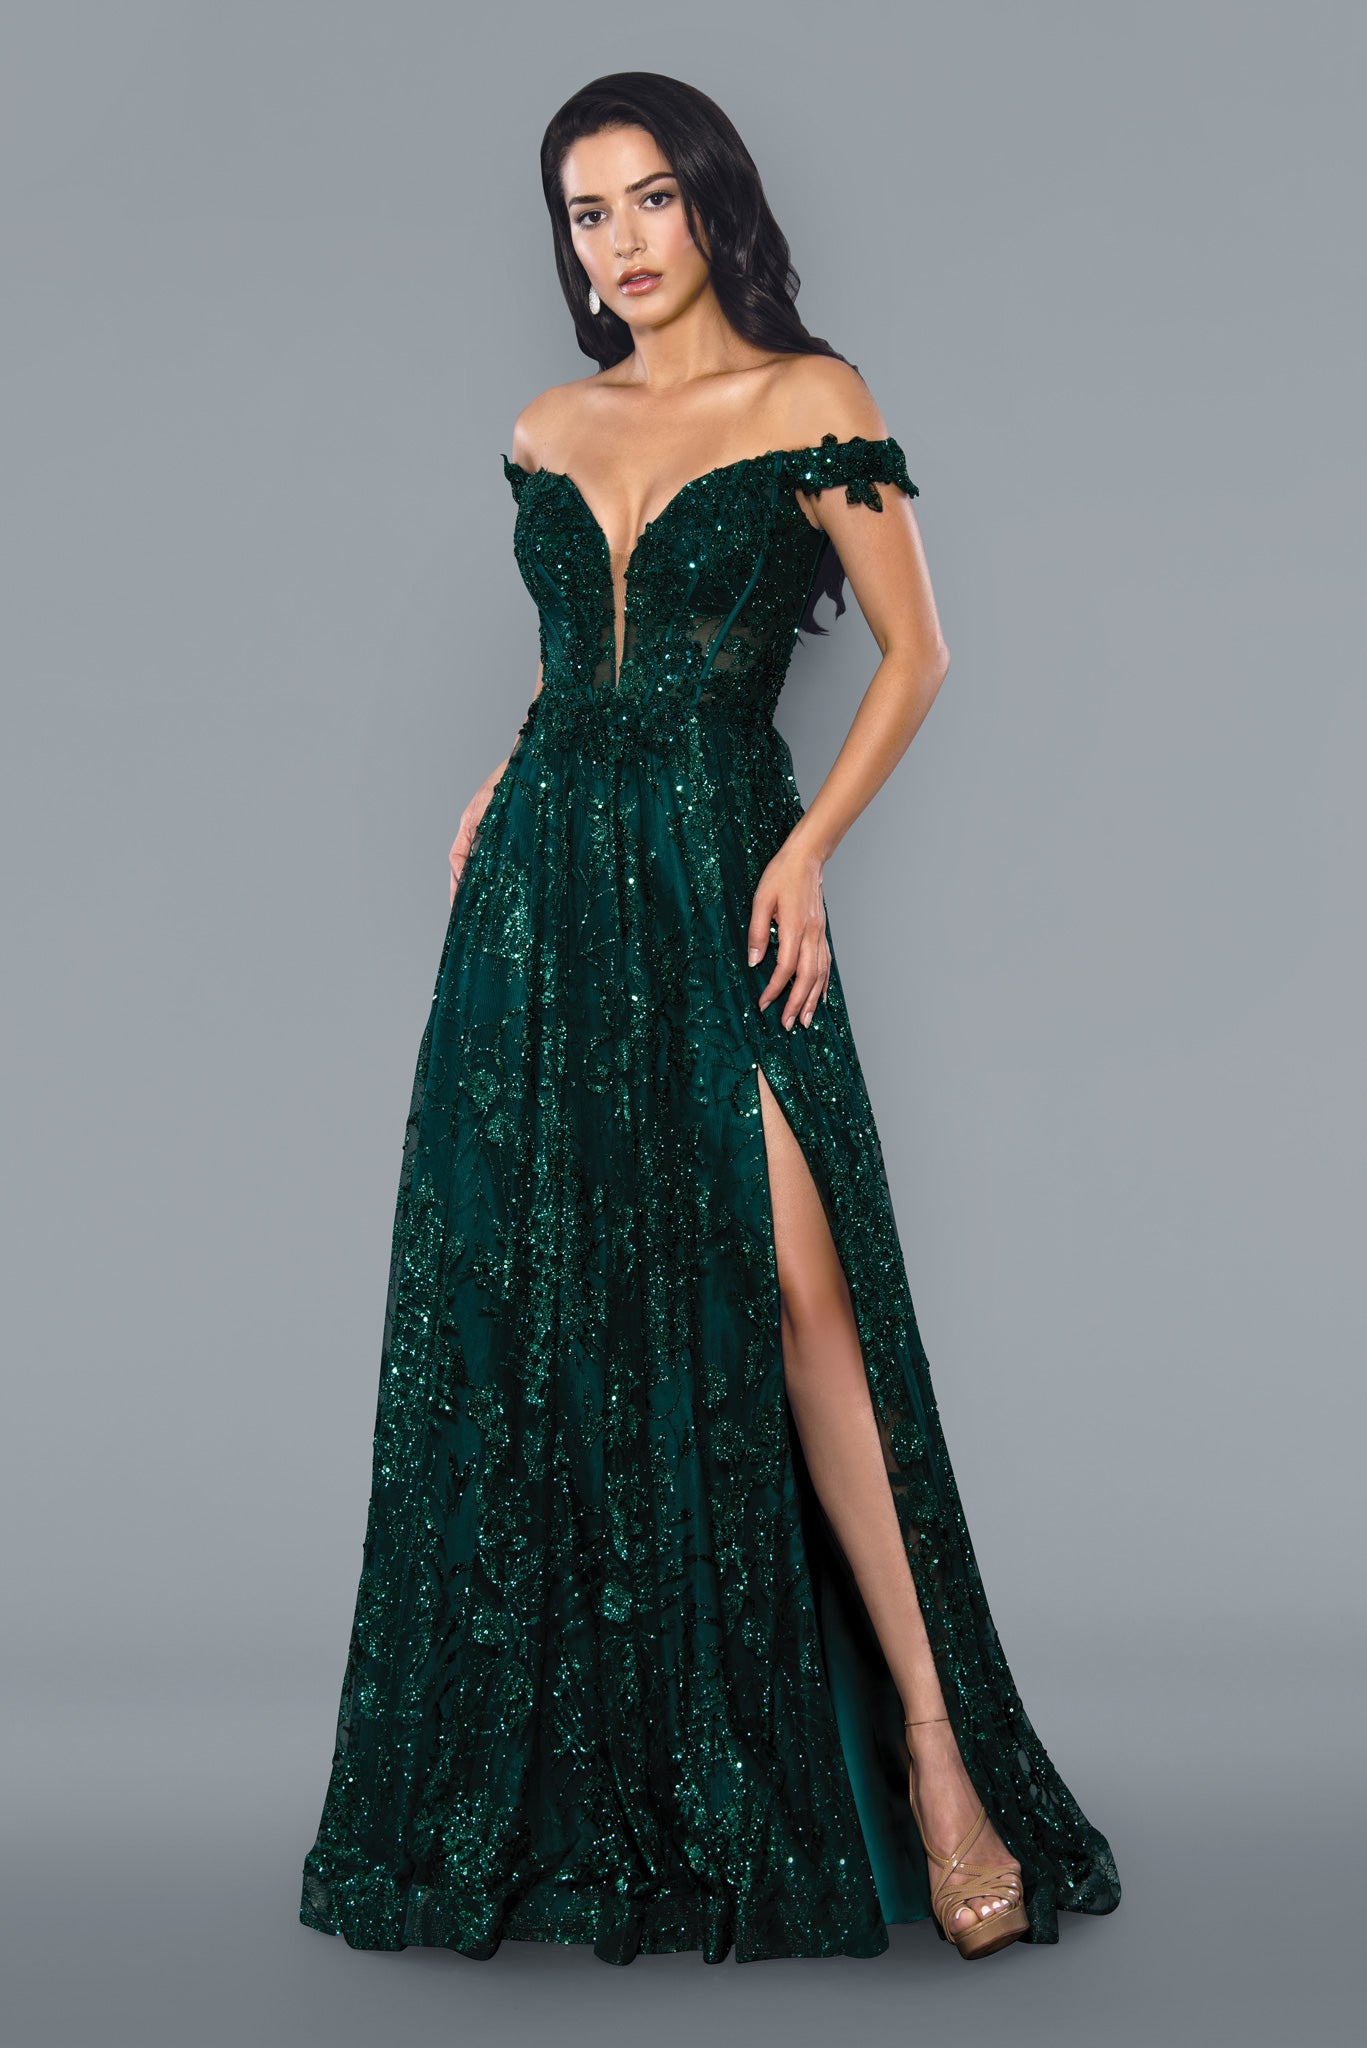 Stella Couture 21064 is a long a line formal prom and pageant dress. Featuring a plunging deep V Neckline with a sheer embellished bodice and off the shoulder straps. high slit in skirt. lace up corset back. Great for any formal event.  Available Size: 0-18  Available Color: Green, Blue, Sage, Royal